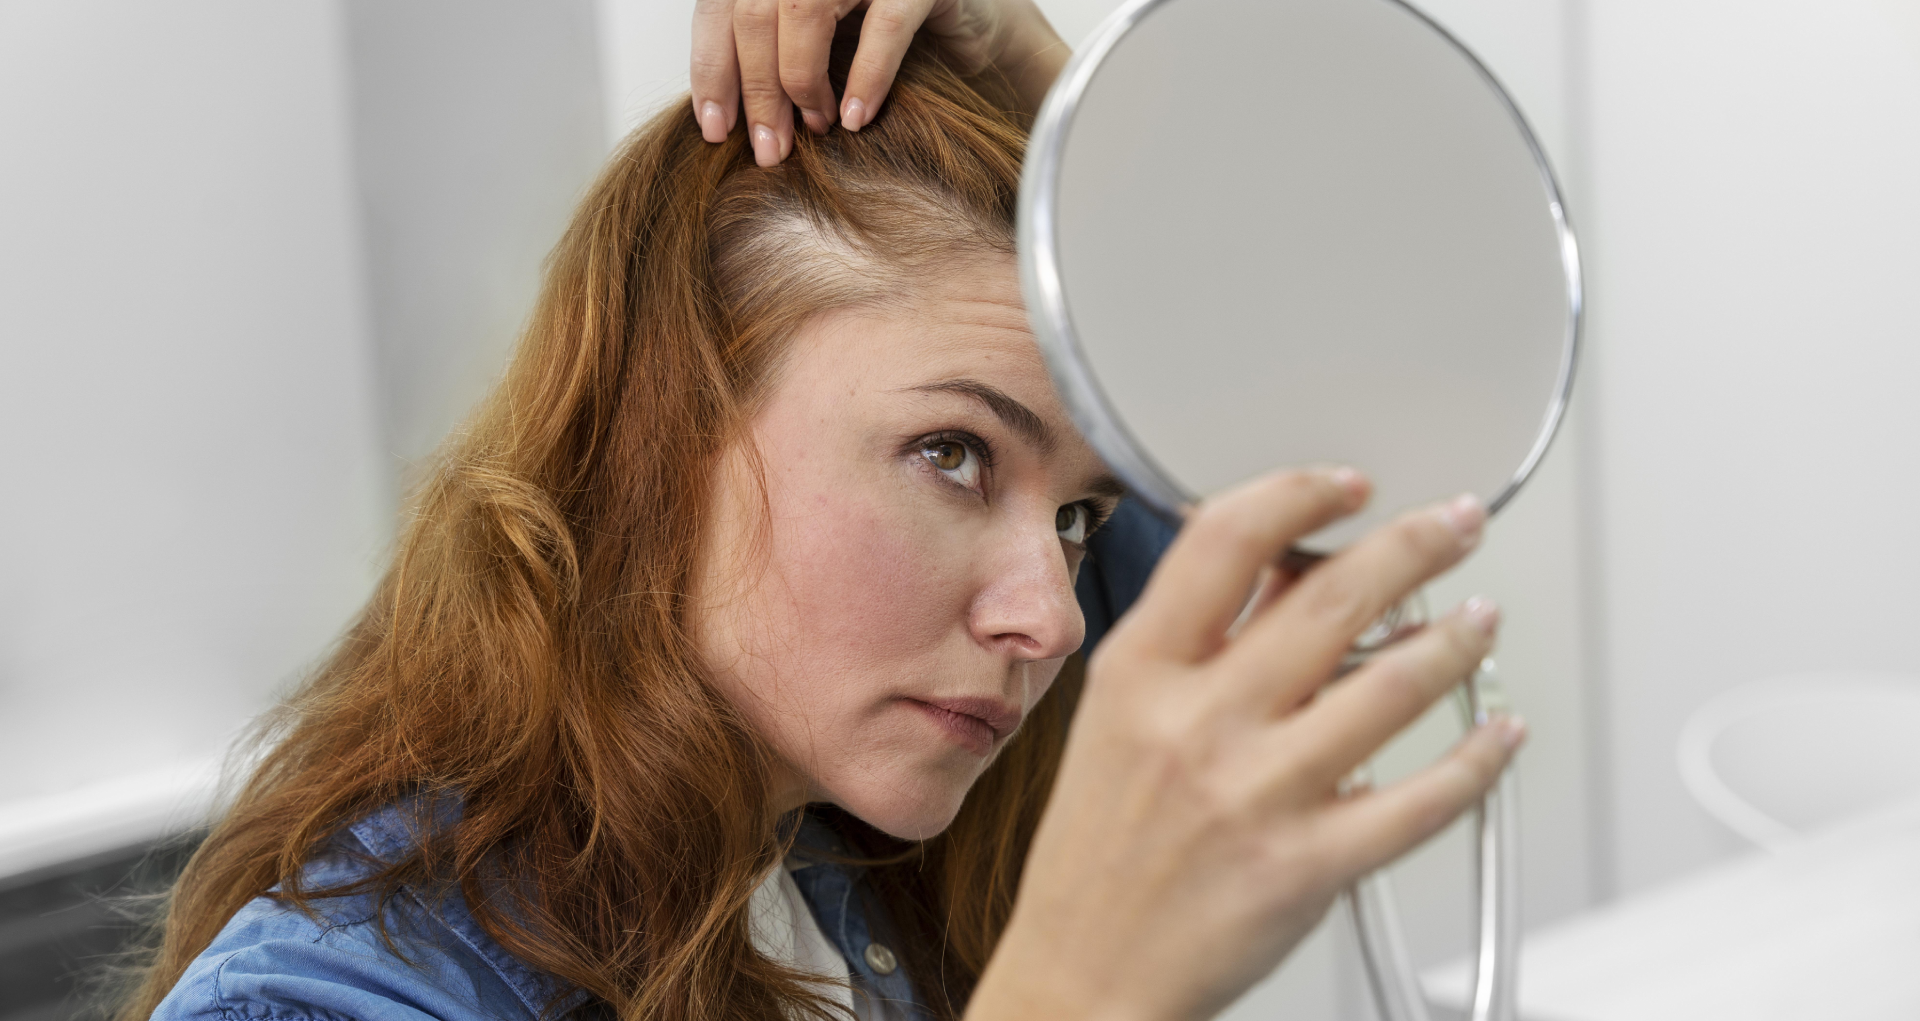 Image featured on the 'How to Reverse Thinning Hair After Menopause - An Expert Guide' by PatchMD - Vitamin Patches and Supplements, addressing the topic of 'Thinning Hair After Menopause' and strategies to counter it.